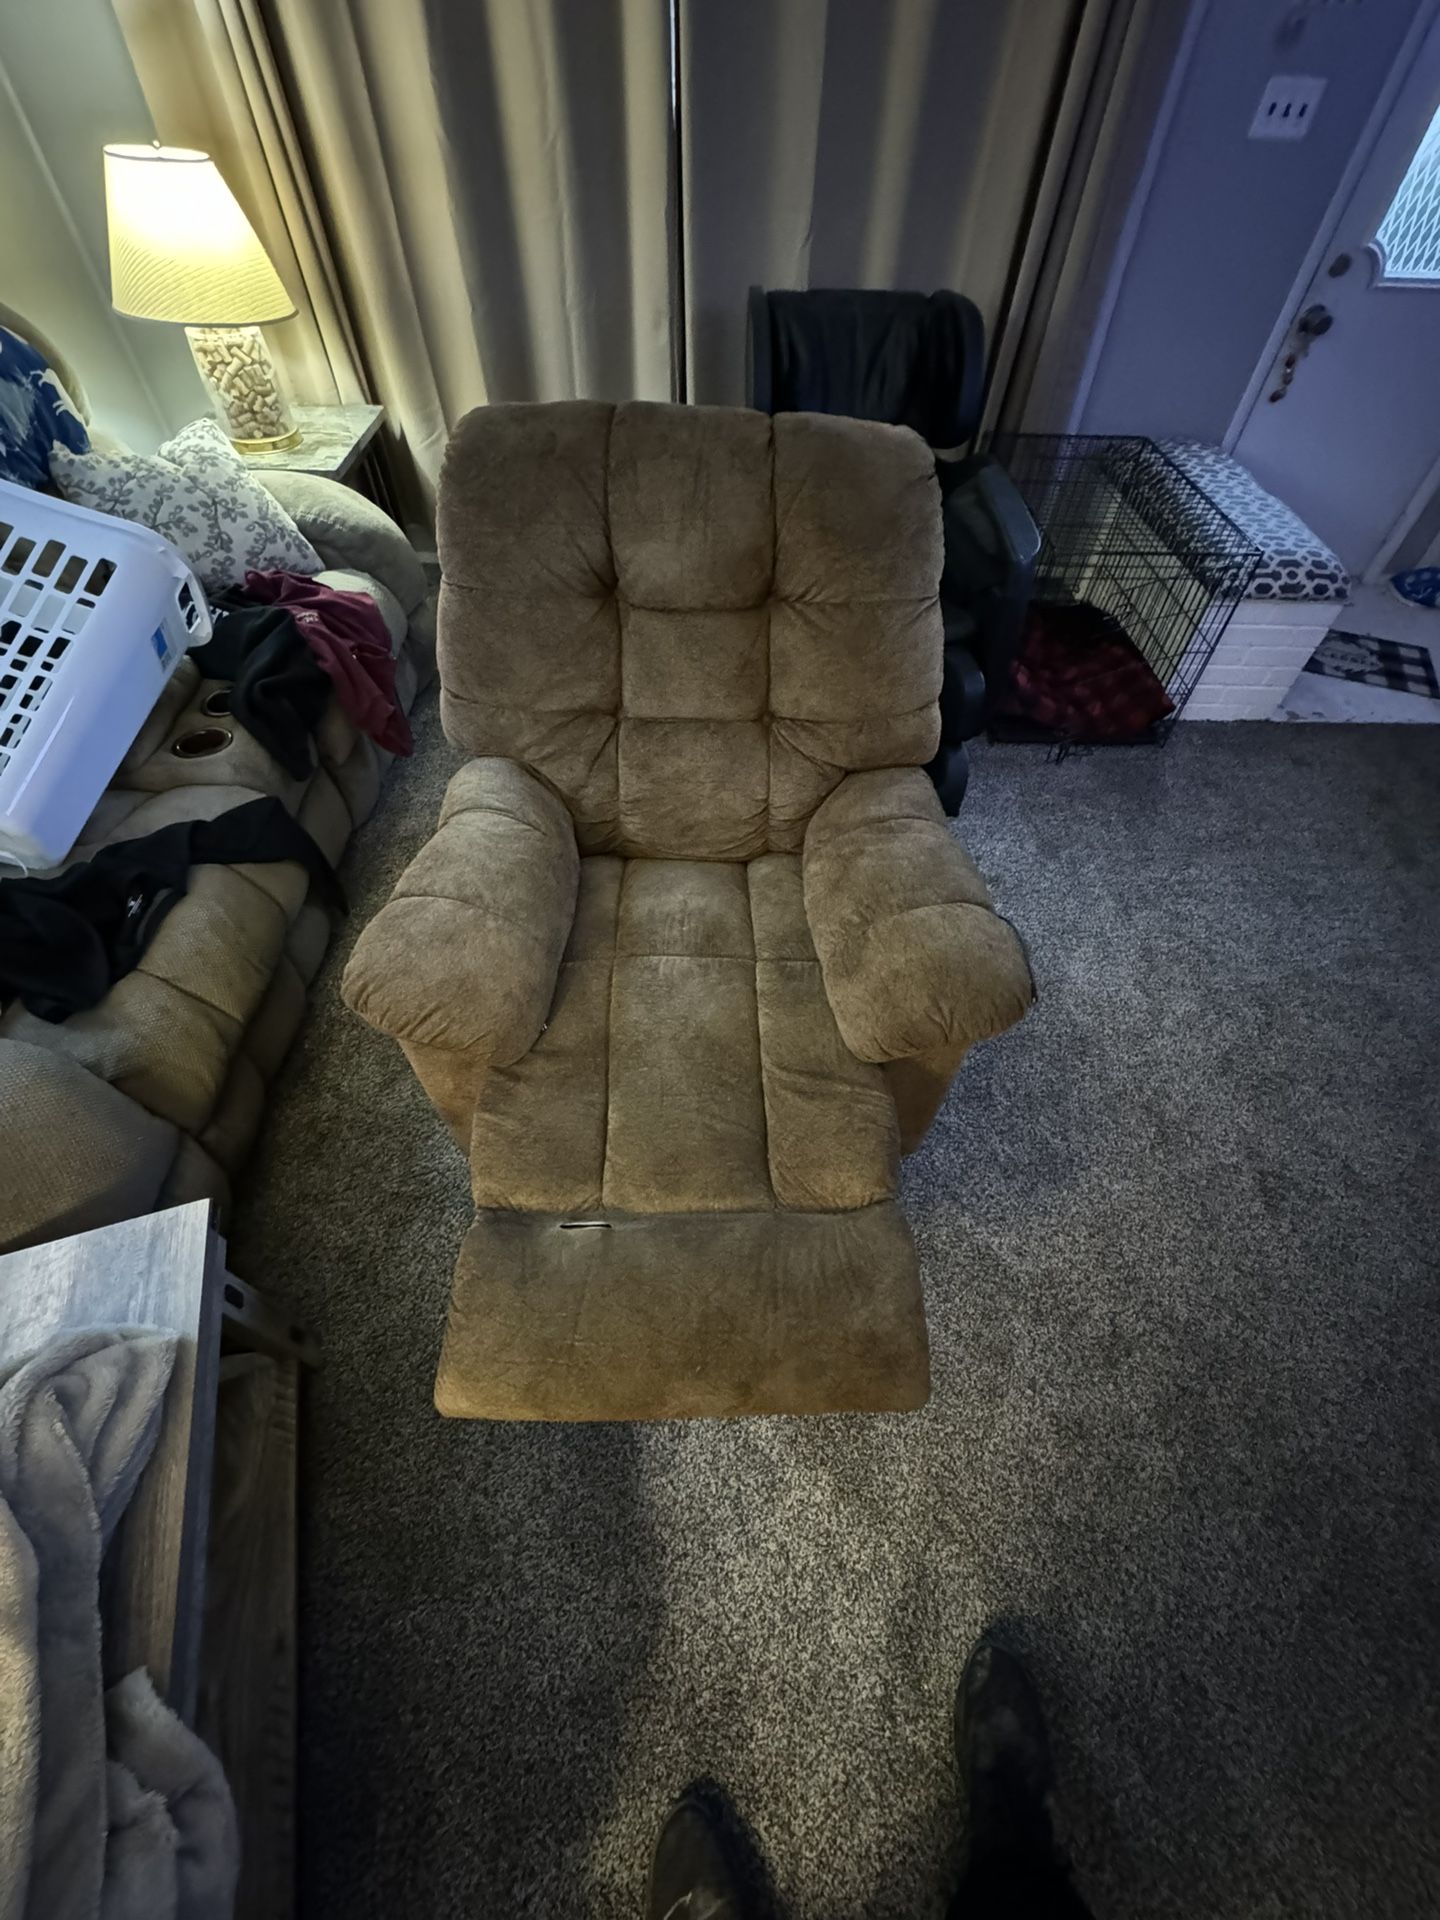 Recliner With Vibrate And Heat